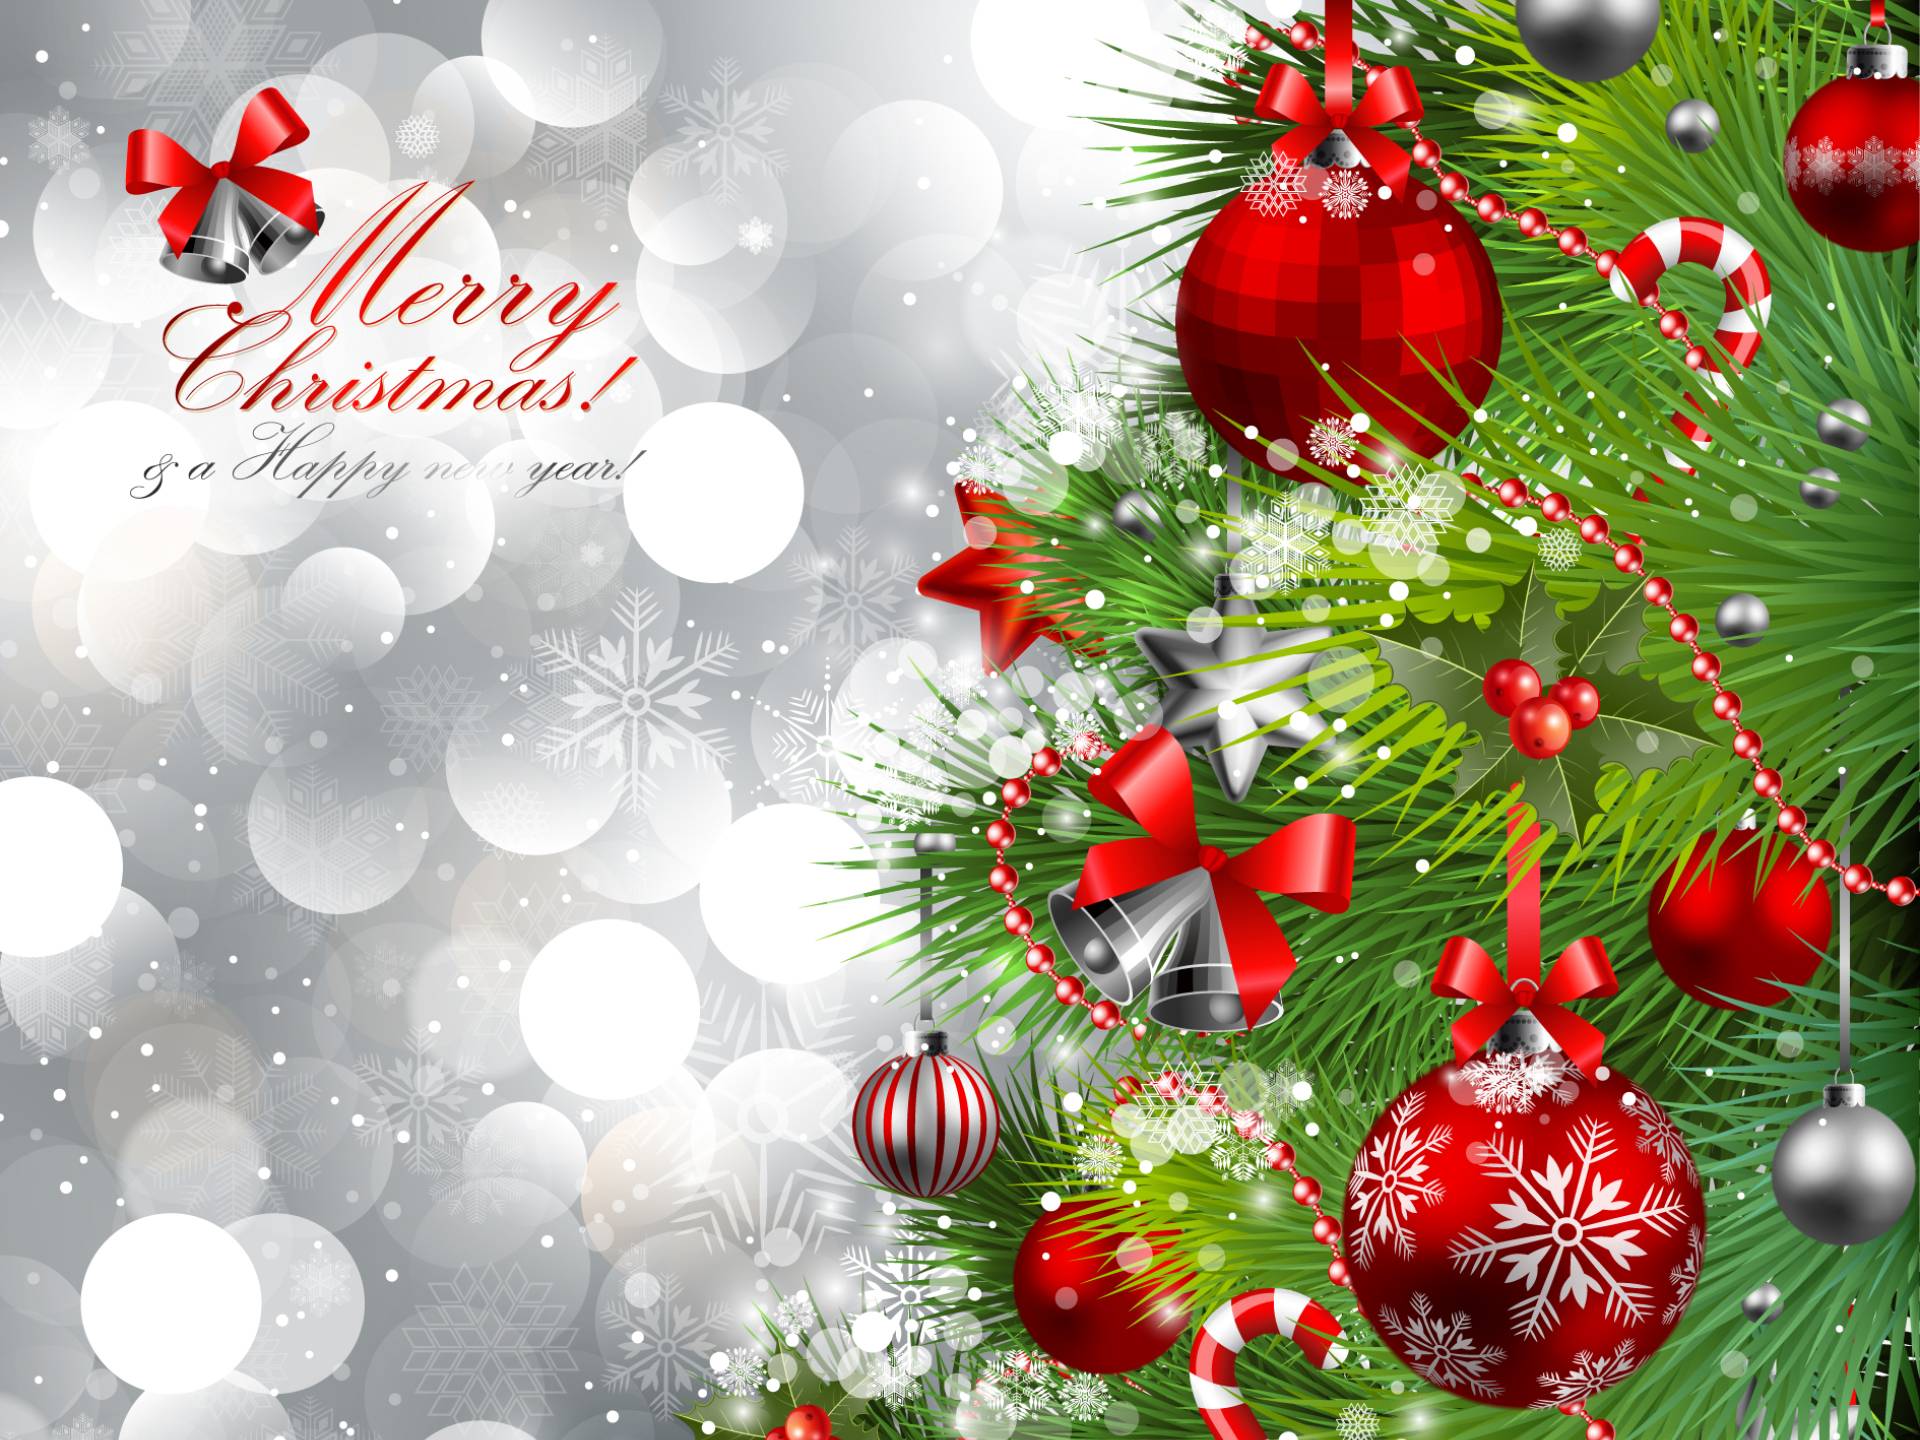 Merry Christmas Wallpaper 57 Background